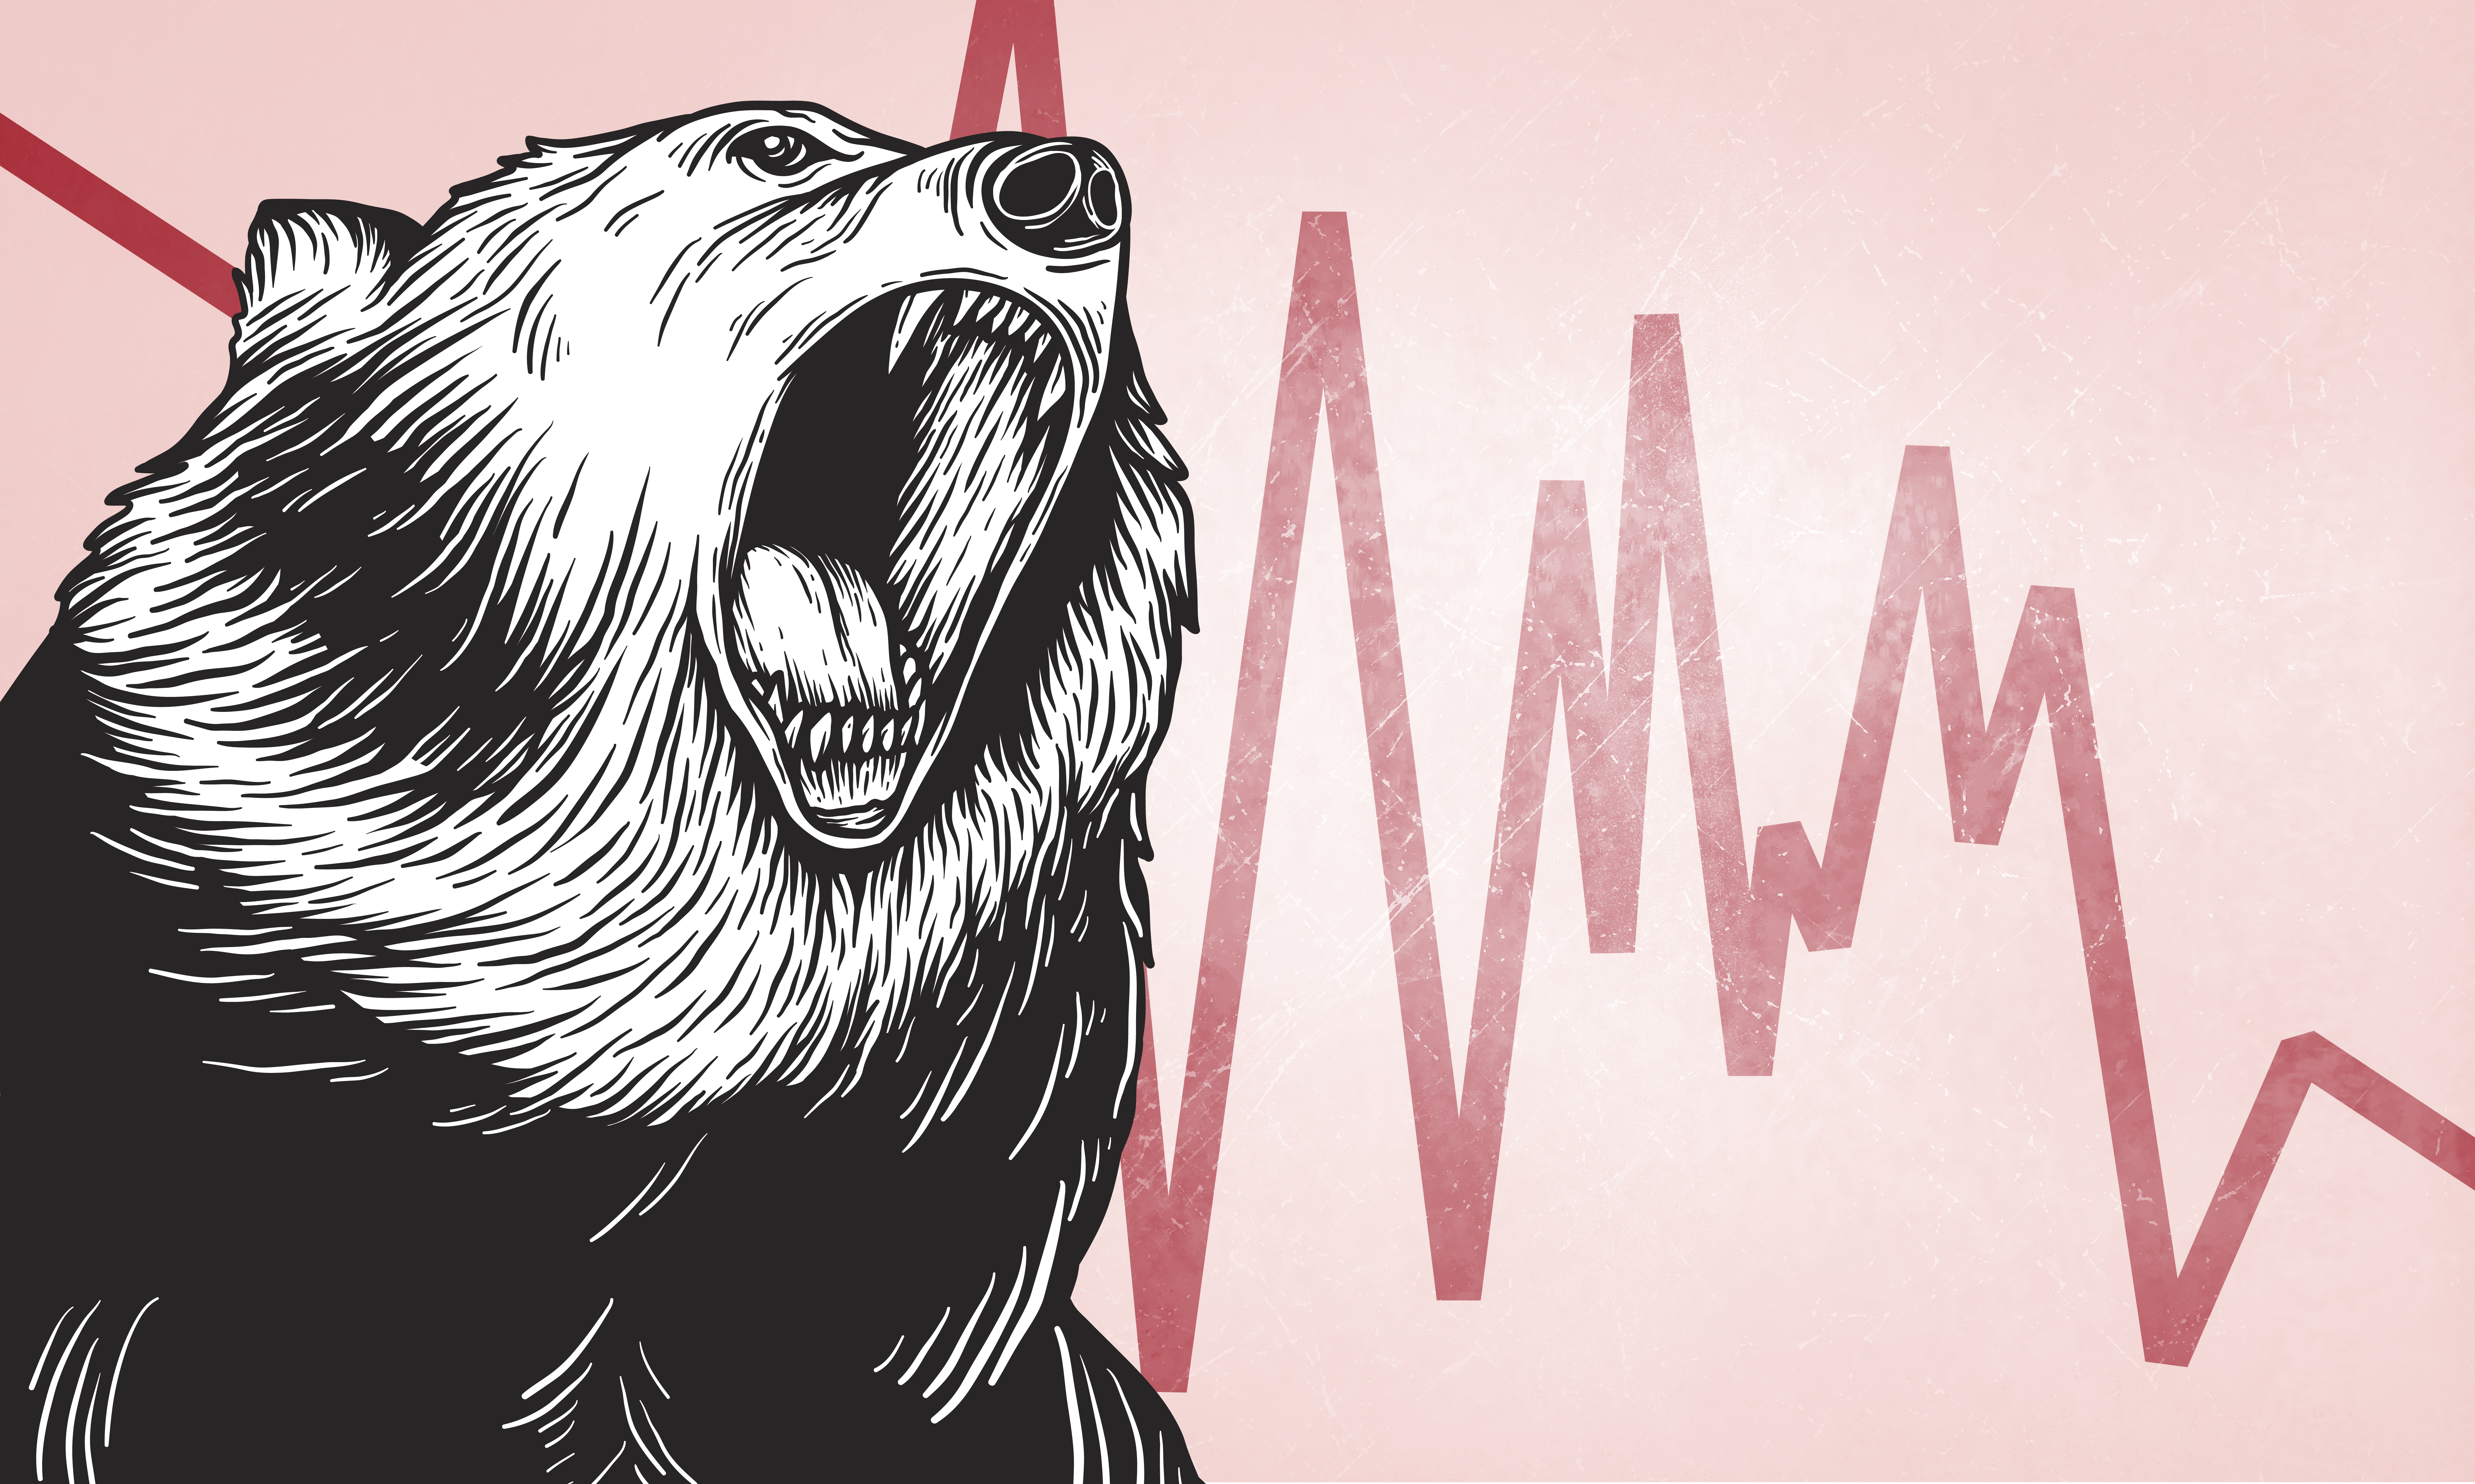 Bear market wipes 25 cryptocurrency exchanges in 30 days